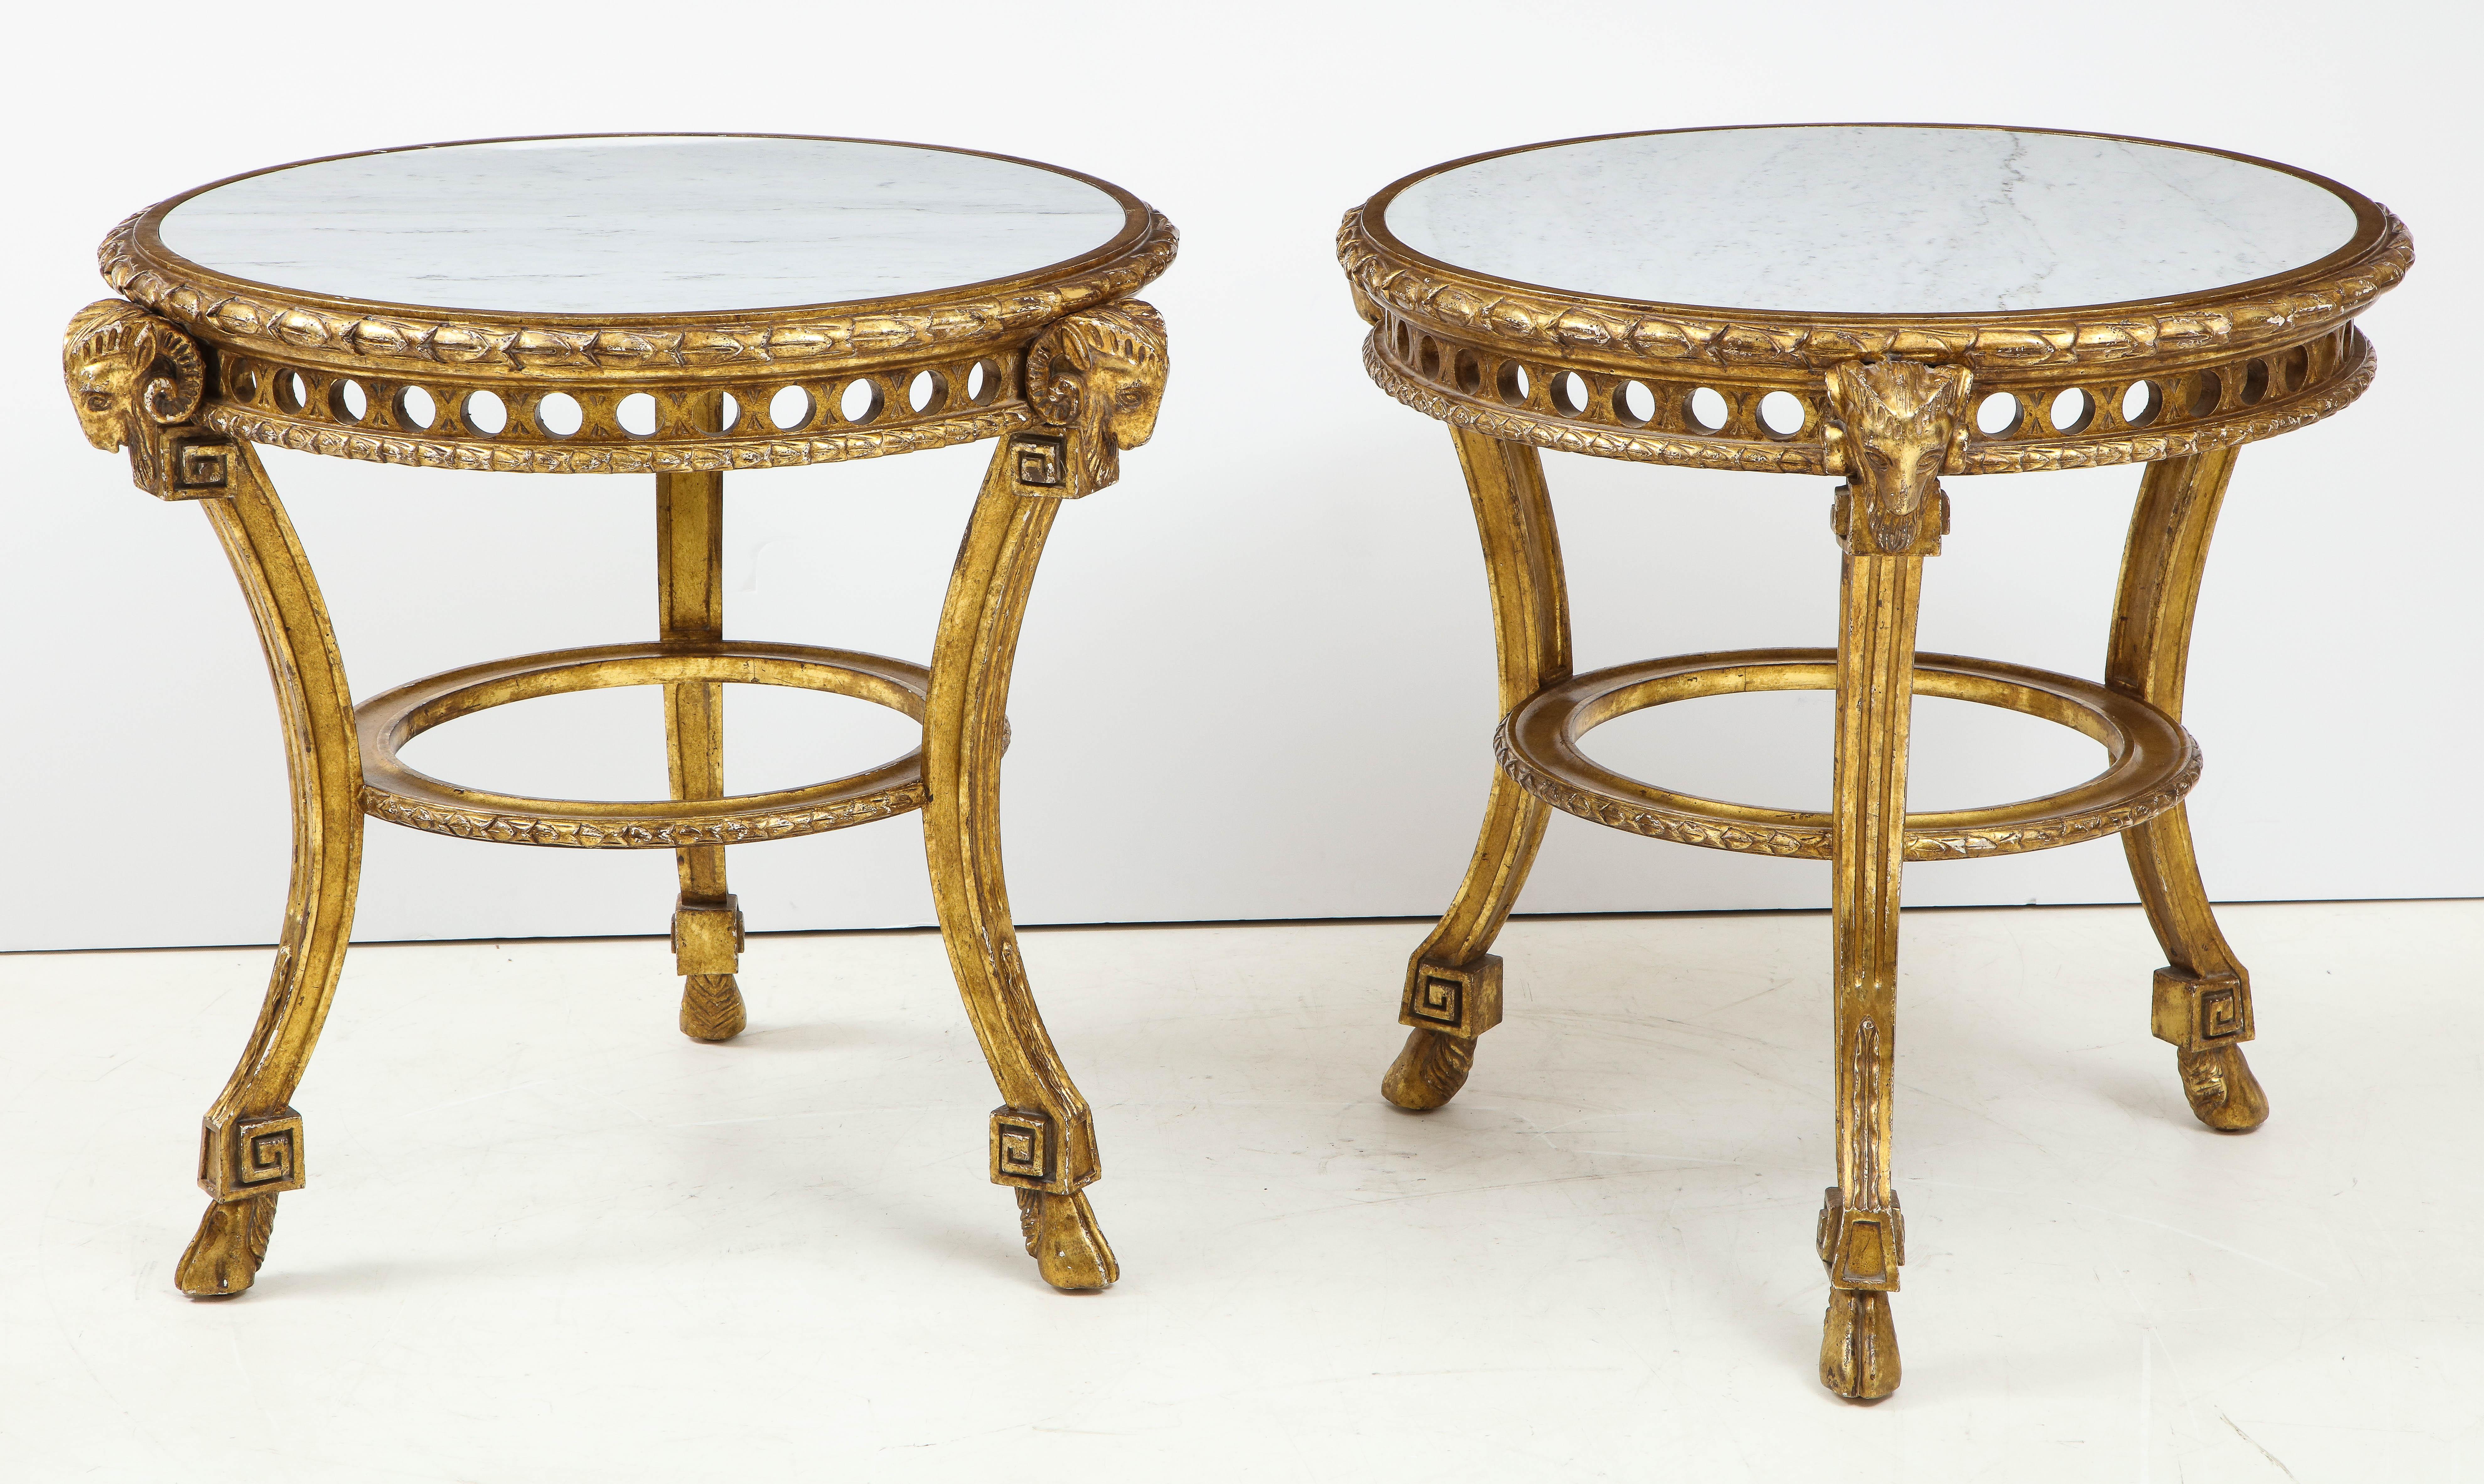 Neoclassical Pair of French Giltwood and Marble Guéridons